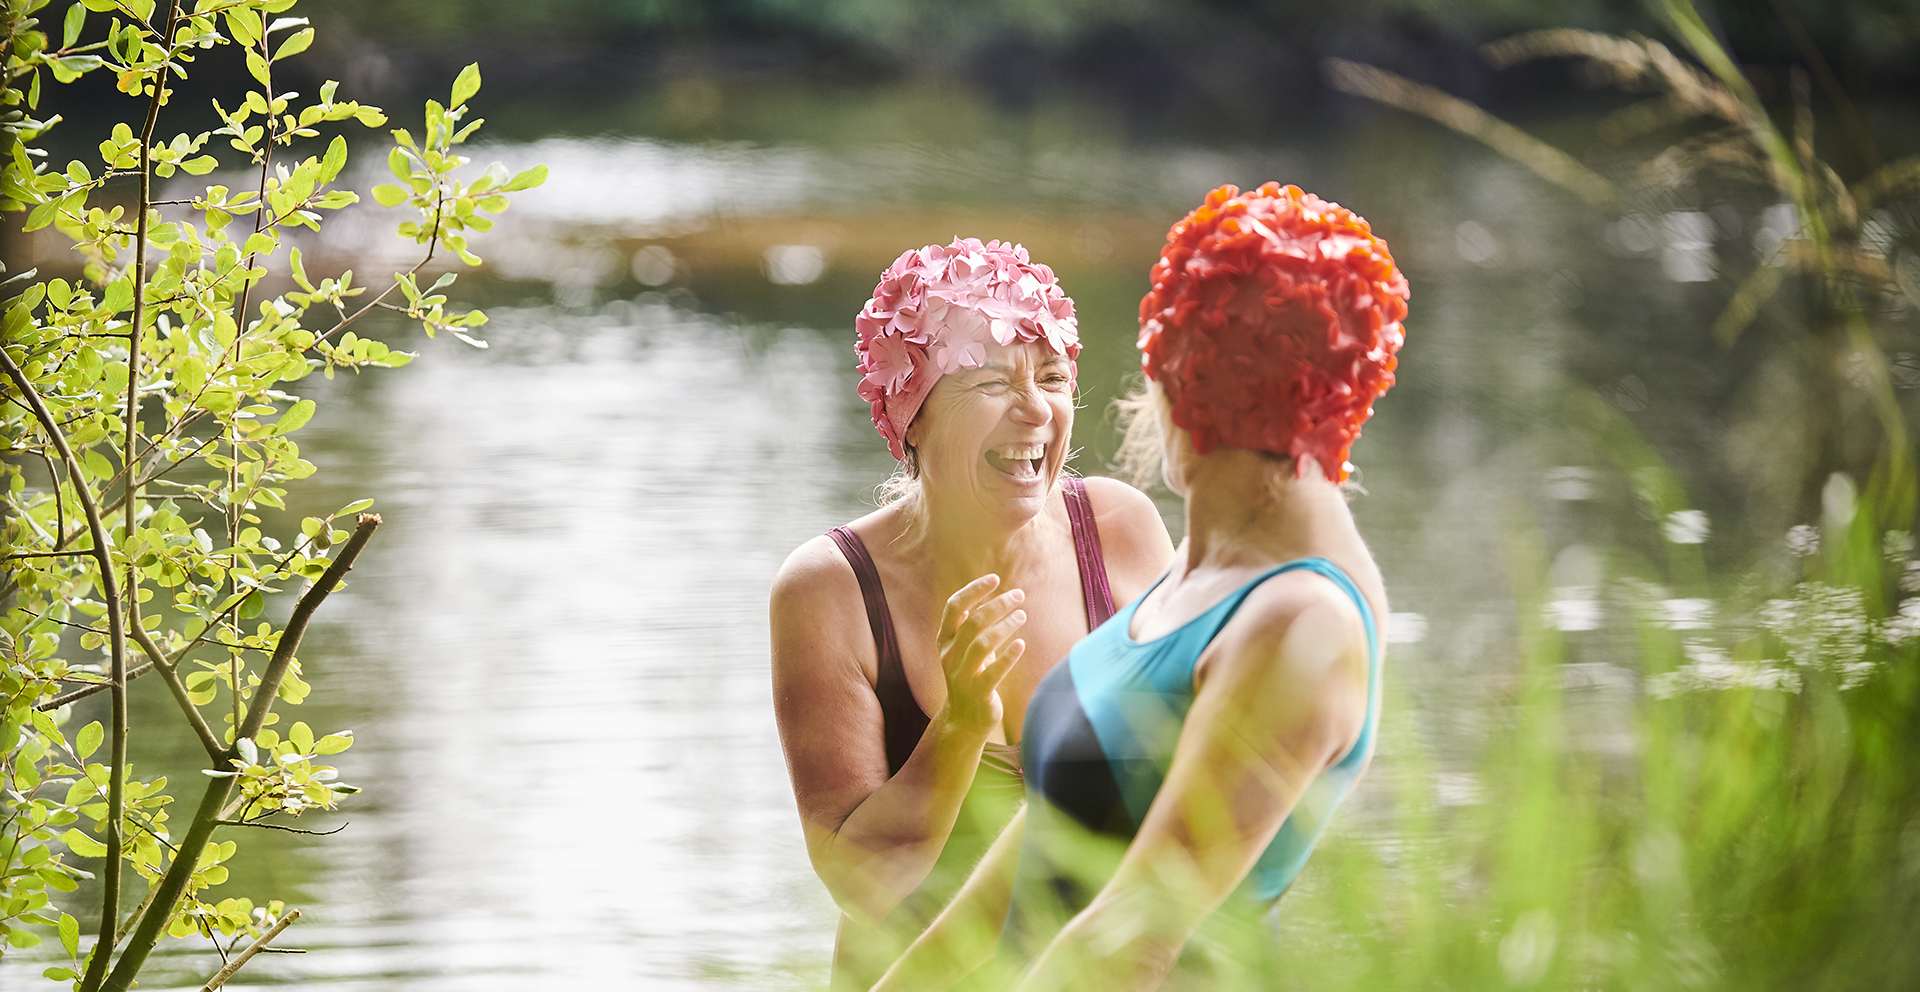 Two ladies laughing in a rural river